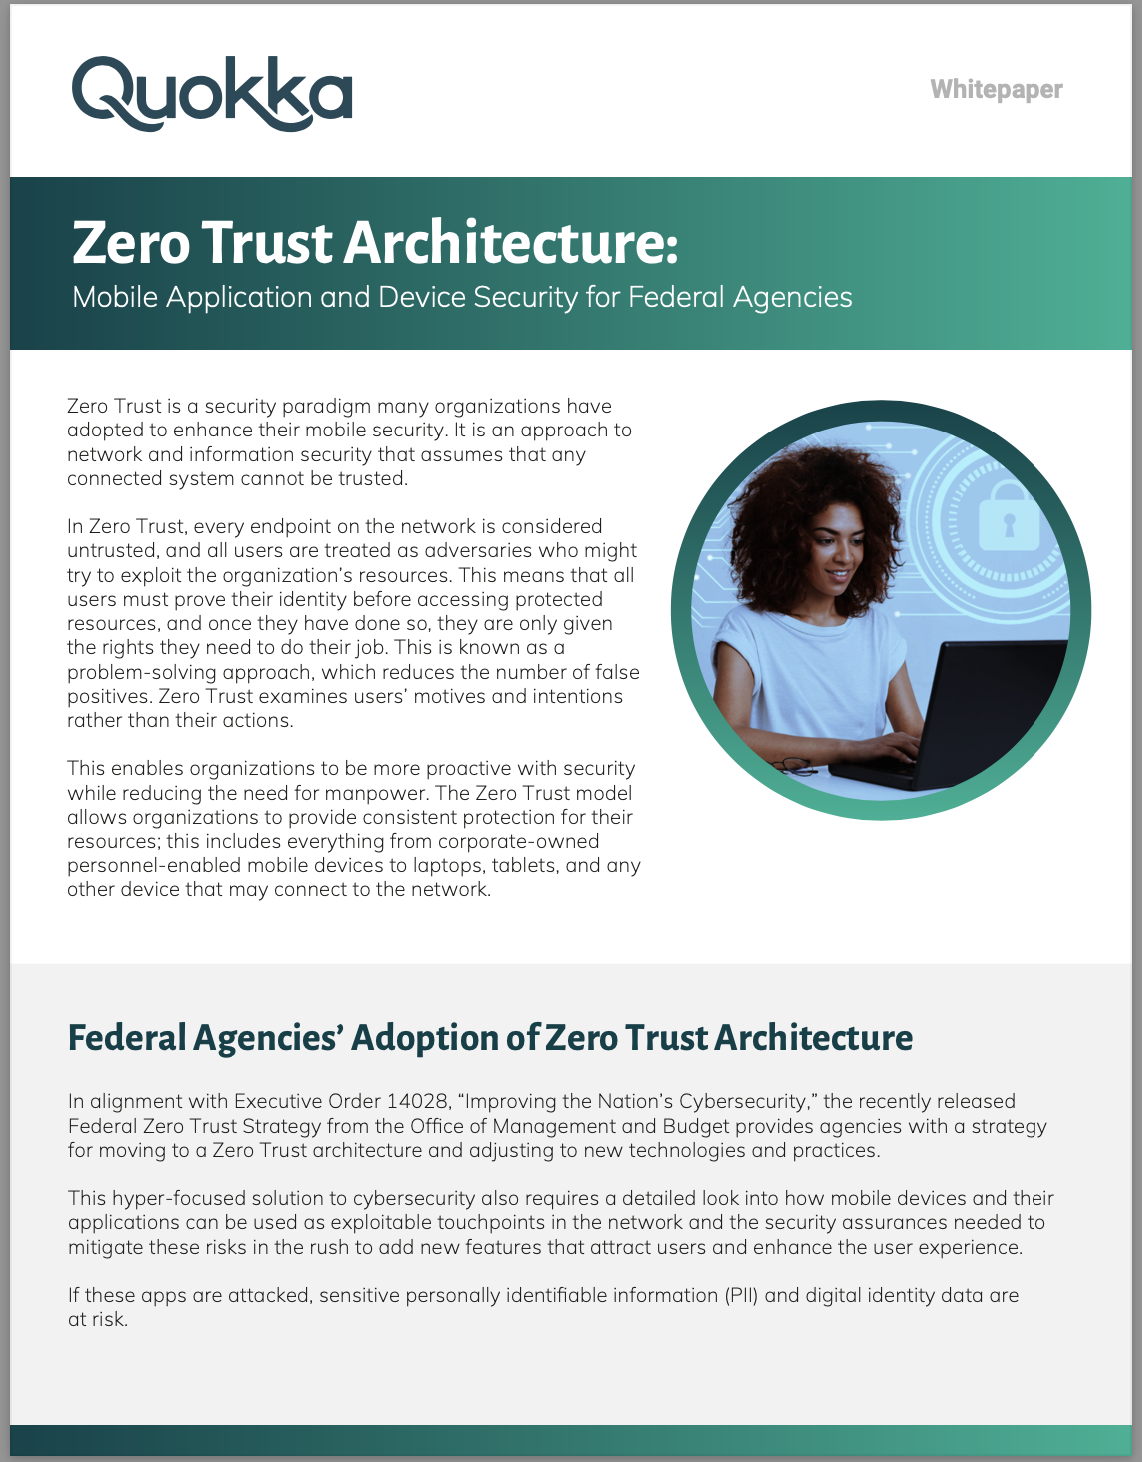 A whitepaper document explaining Zero Trust Architecture, contains a girl on her computer